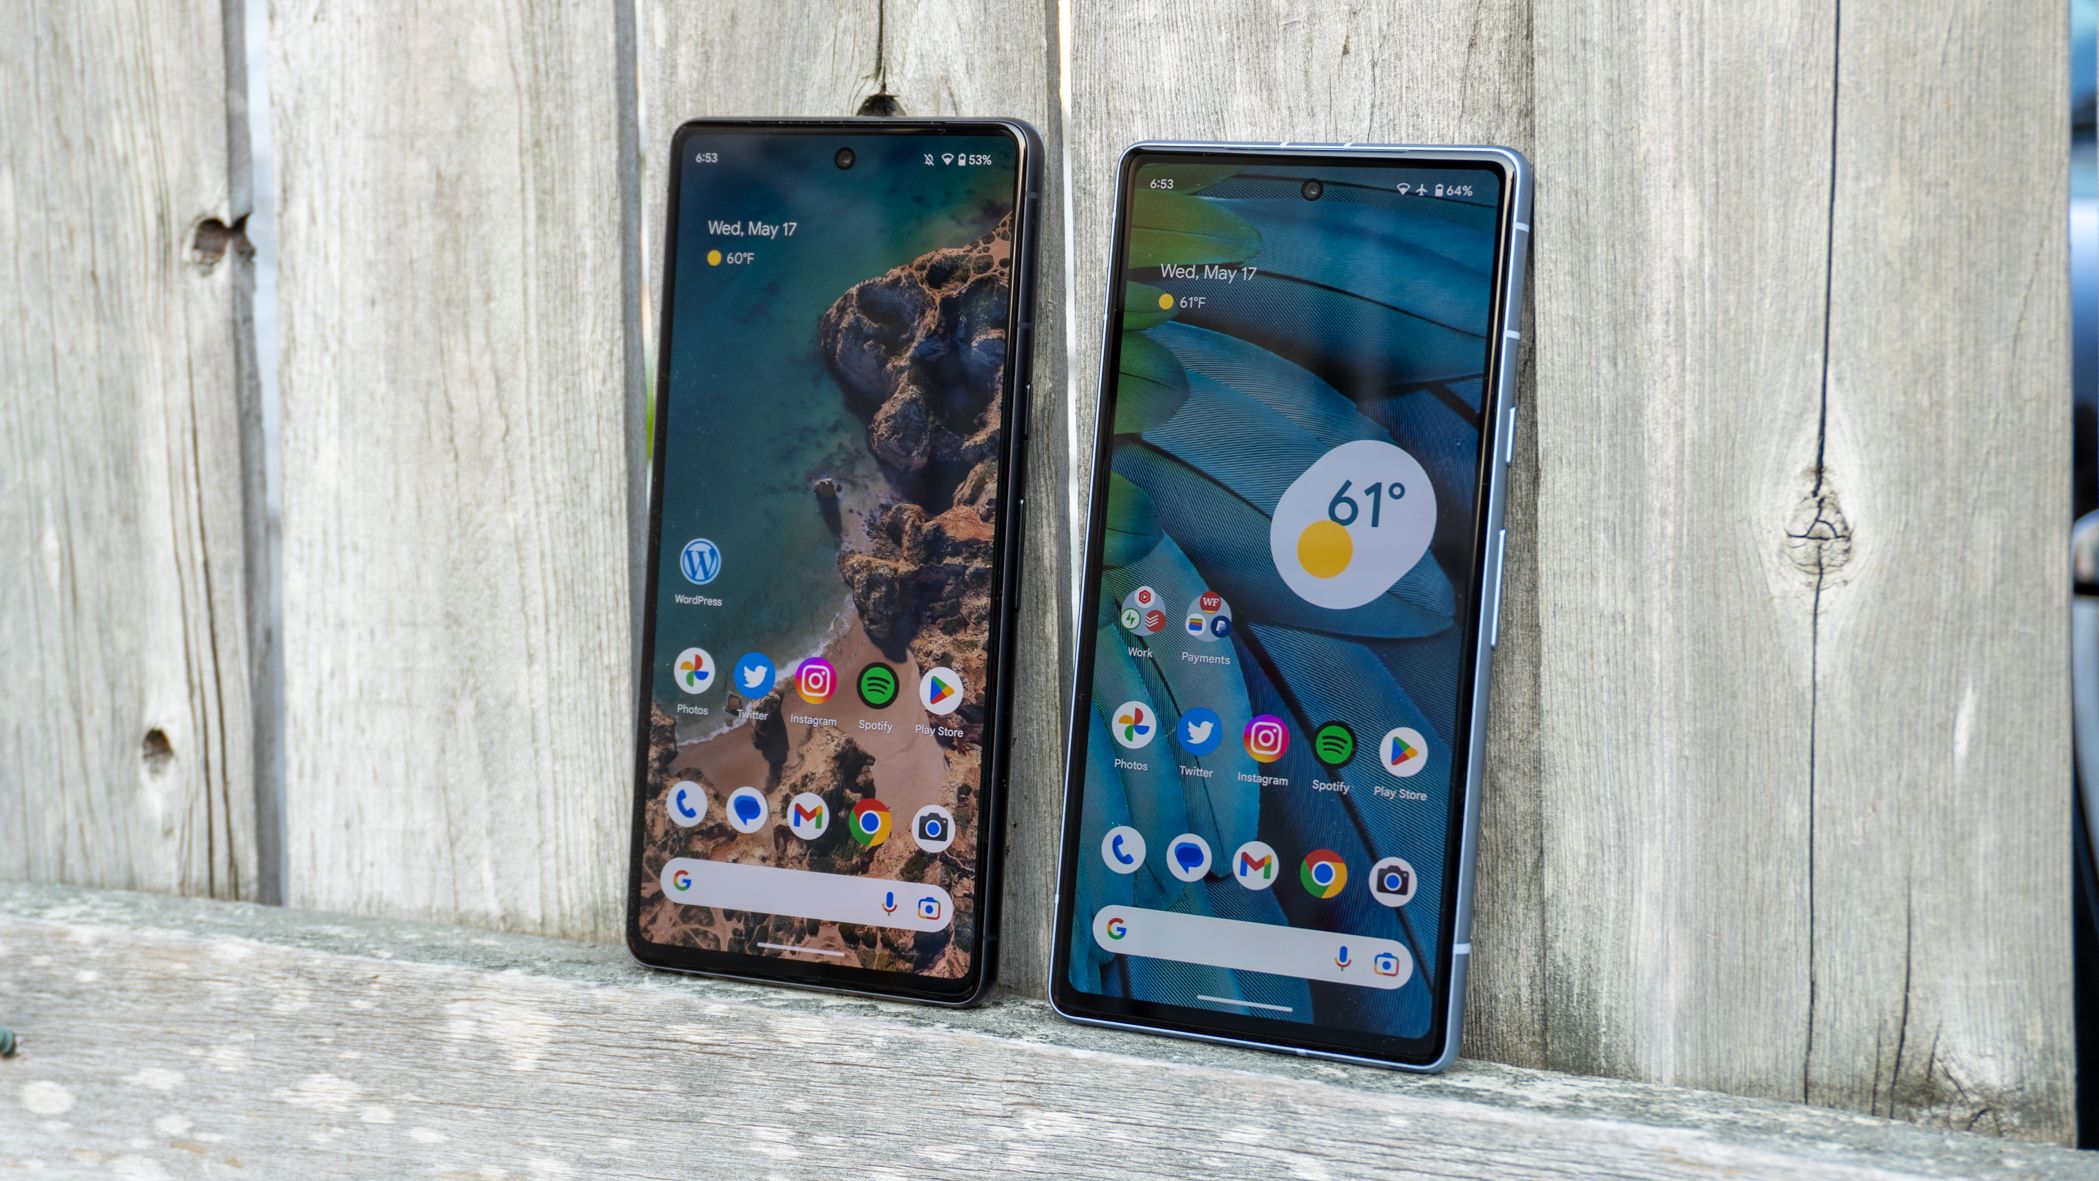 Google 7 Pixel Review: Superb Android Phone at a Great Price